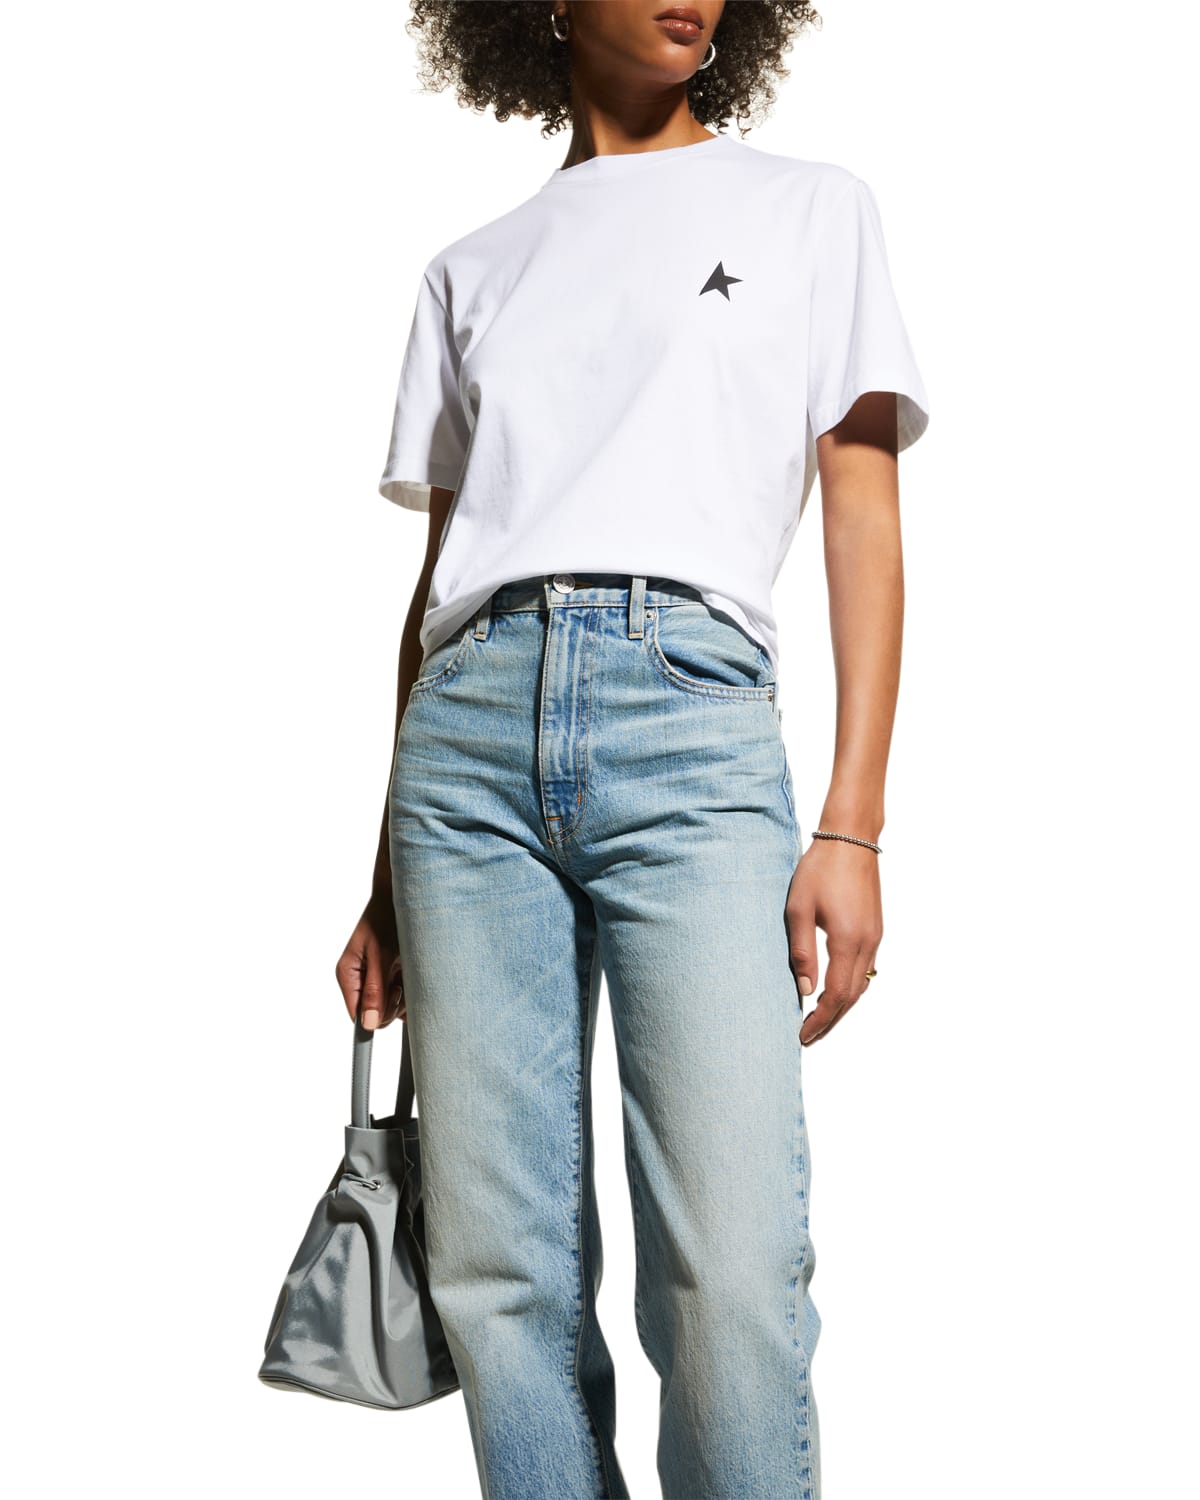 Golden Goose Star Collection T-shirt W/ Printed Star In Optic Wht / Blk